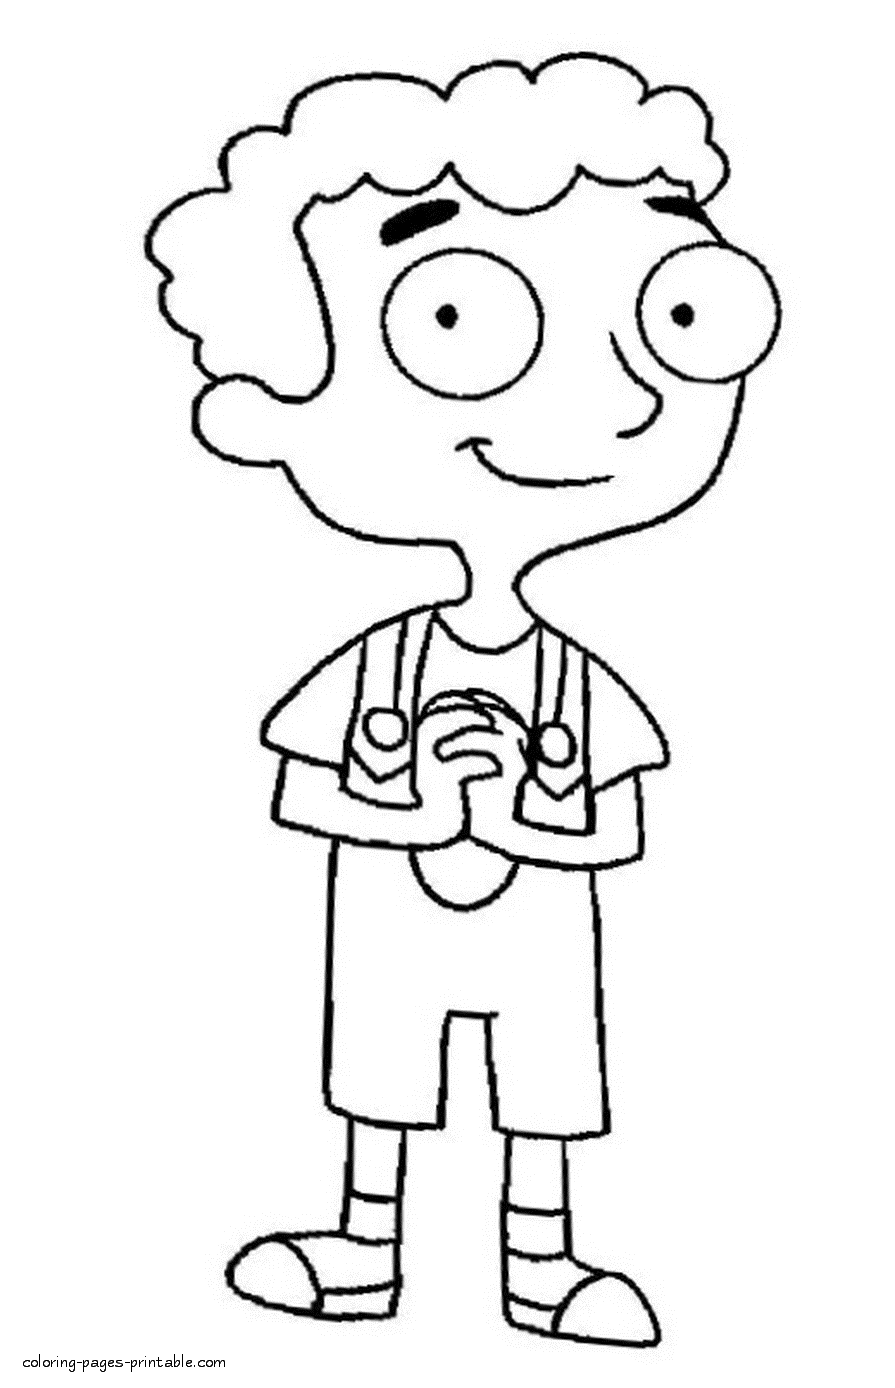 Phineas and Ferb minor characters. Baljeet coloring page